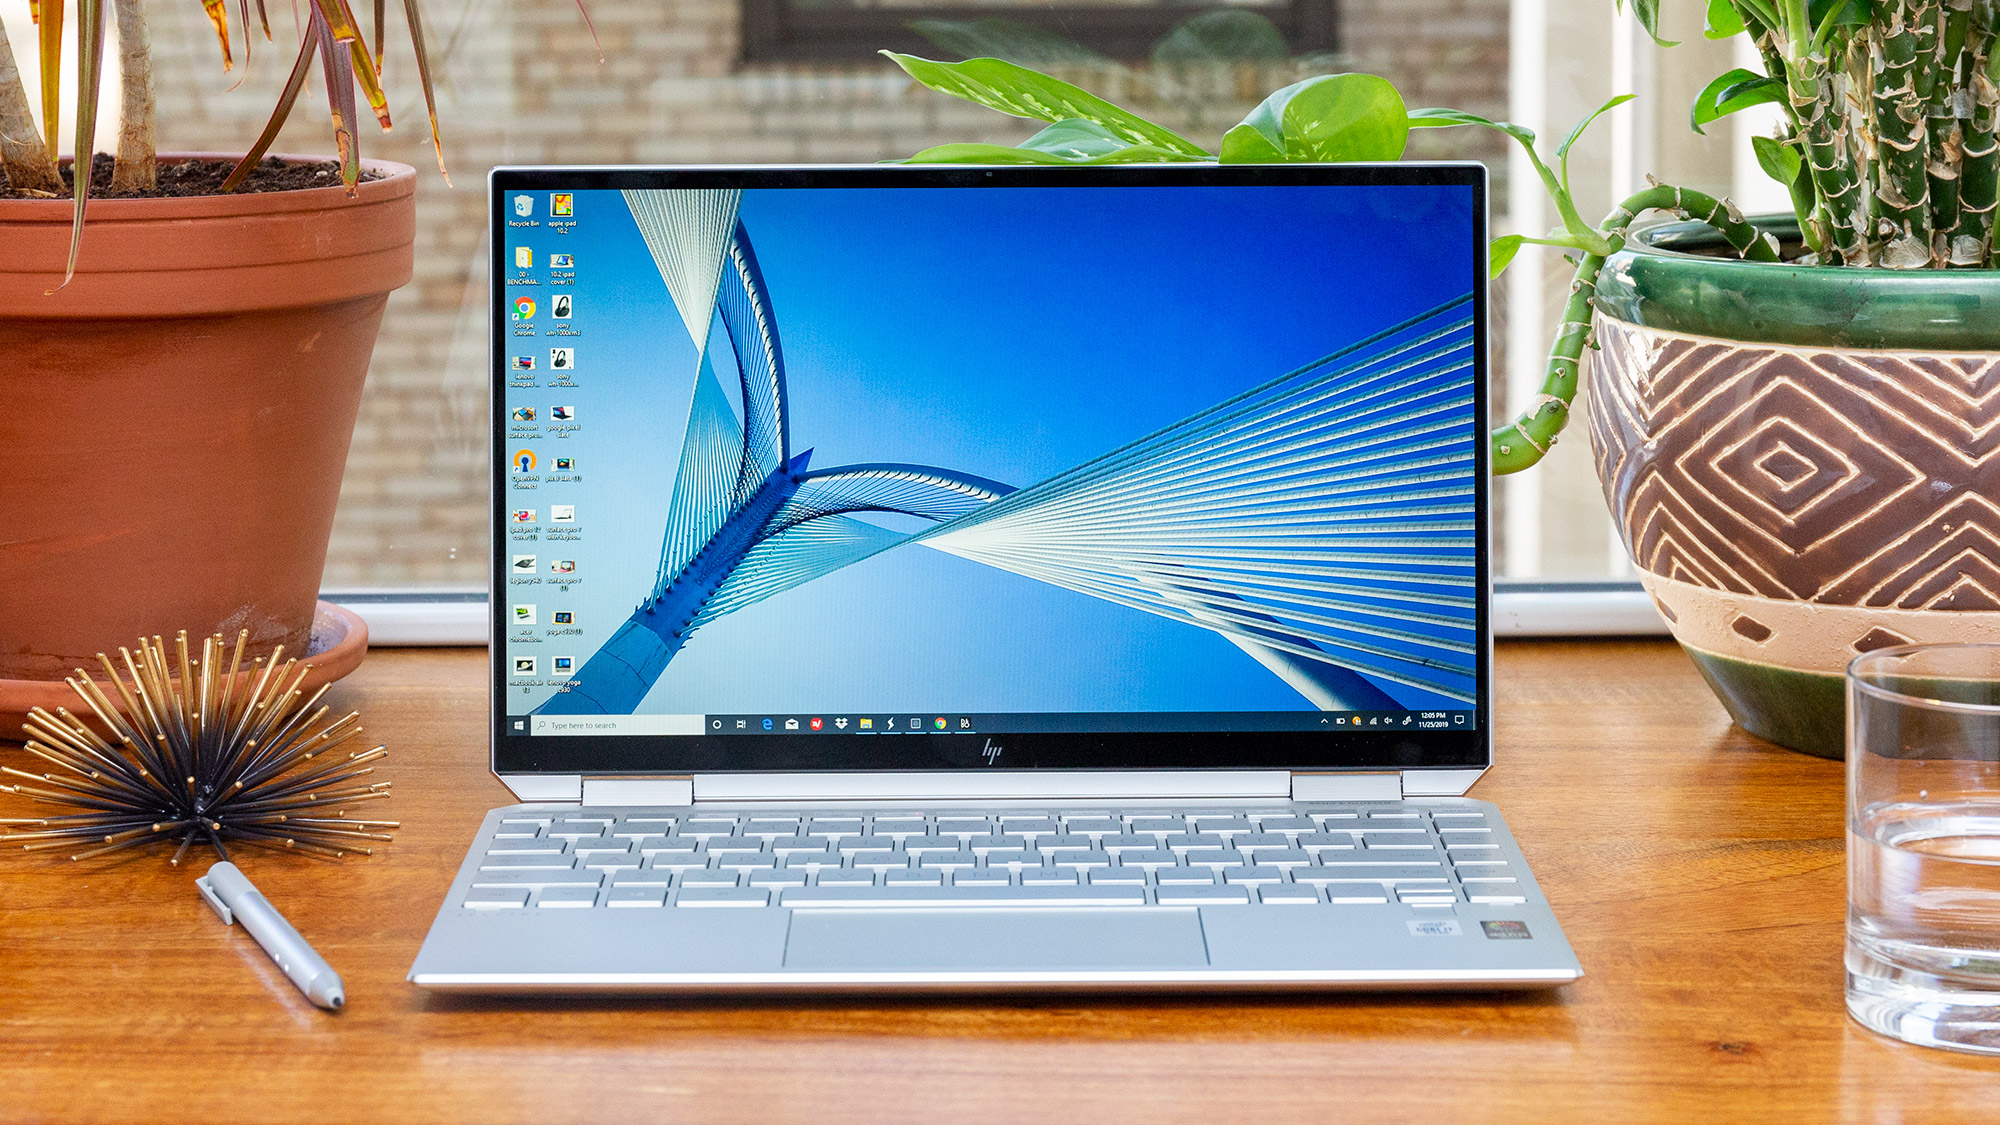 Best Laptop for Casual Use in 2021 - [Comparison & Guide]